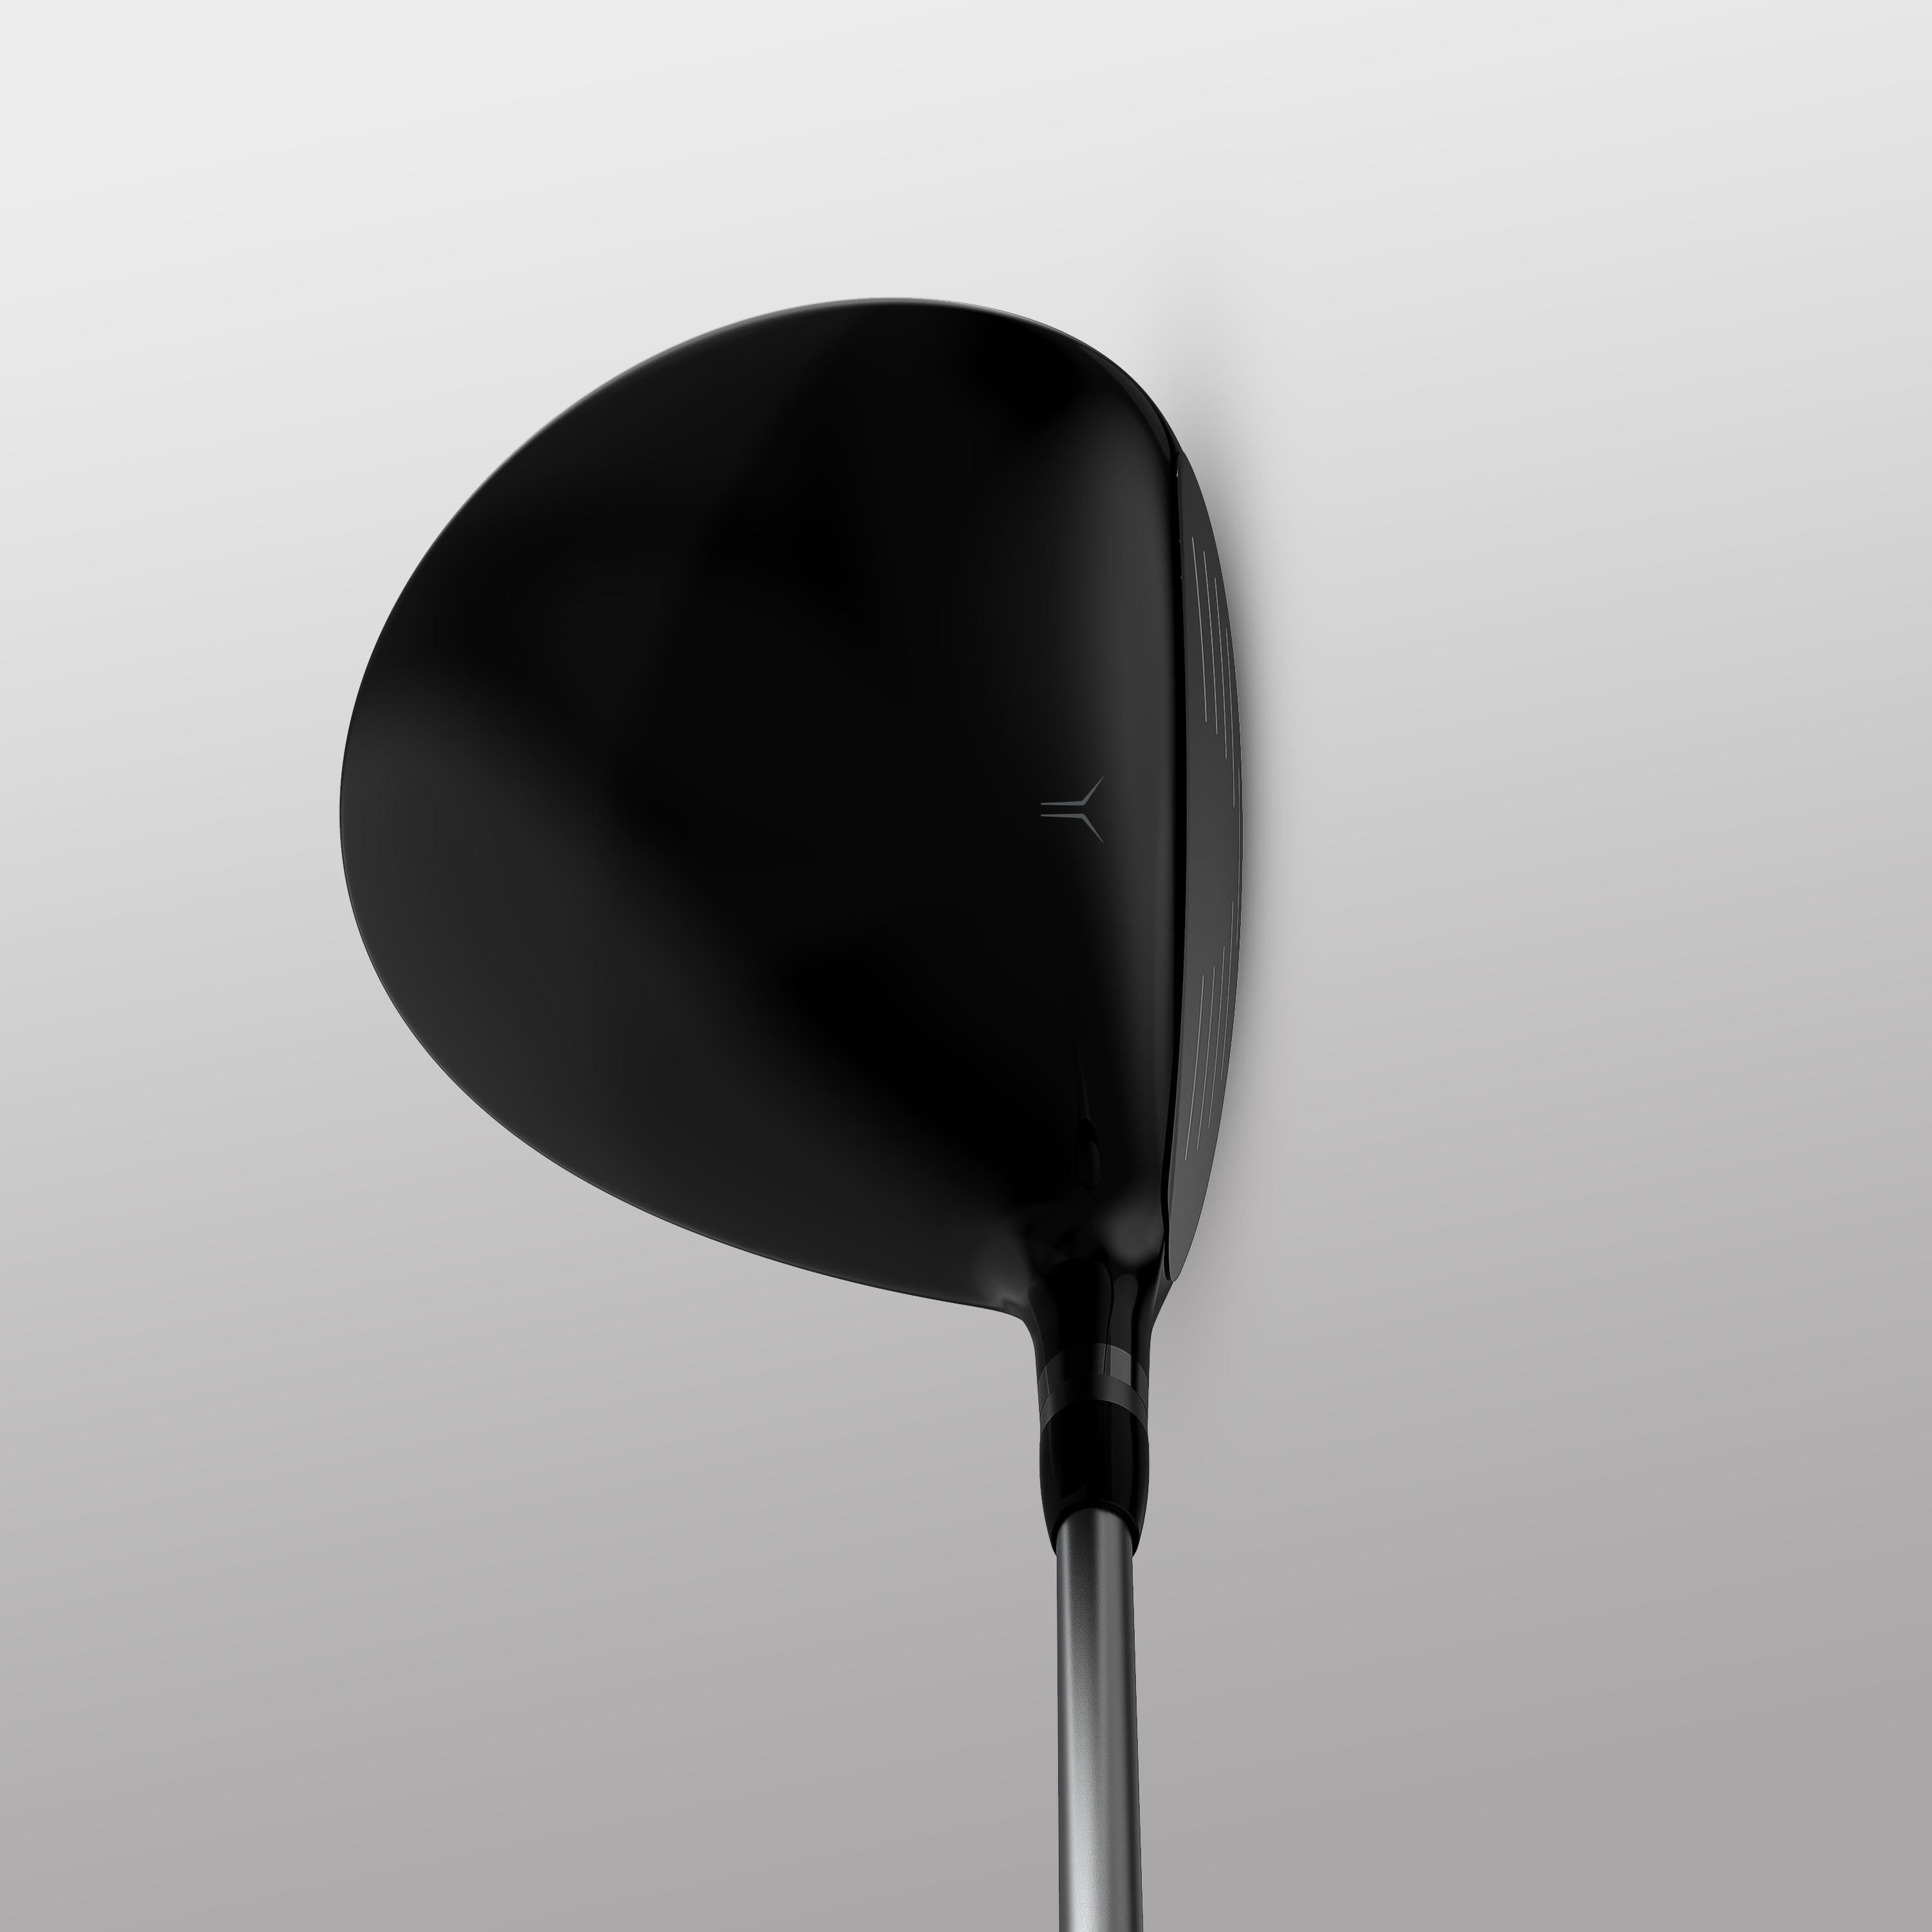 GOLF DRIVER 500 LEFT HANDED SIZE 1 & LOW SPEED 2/8